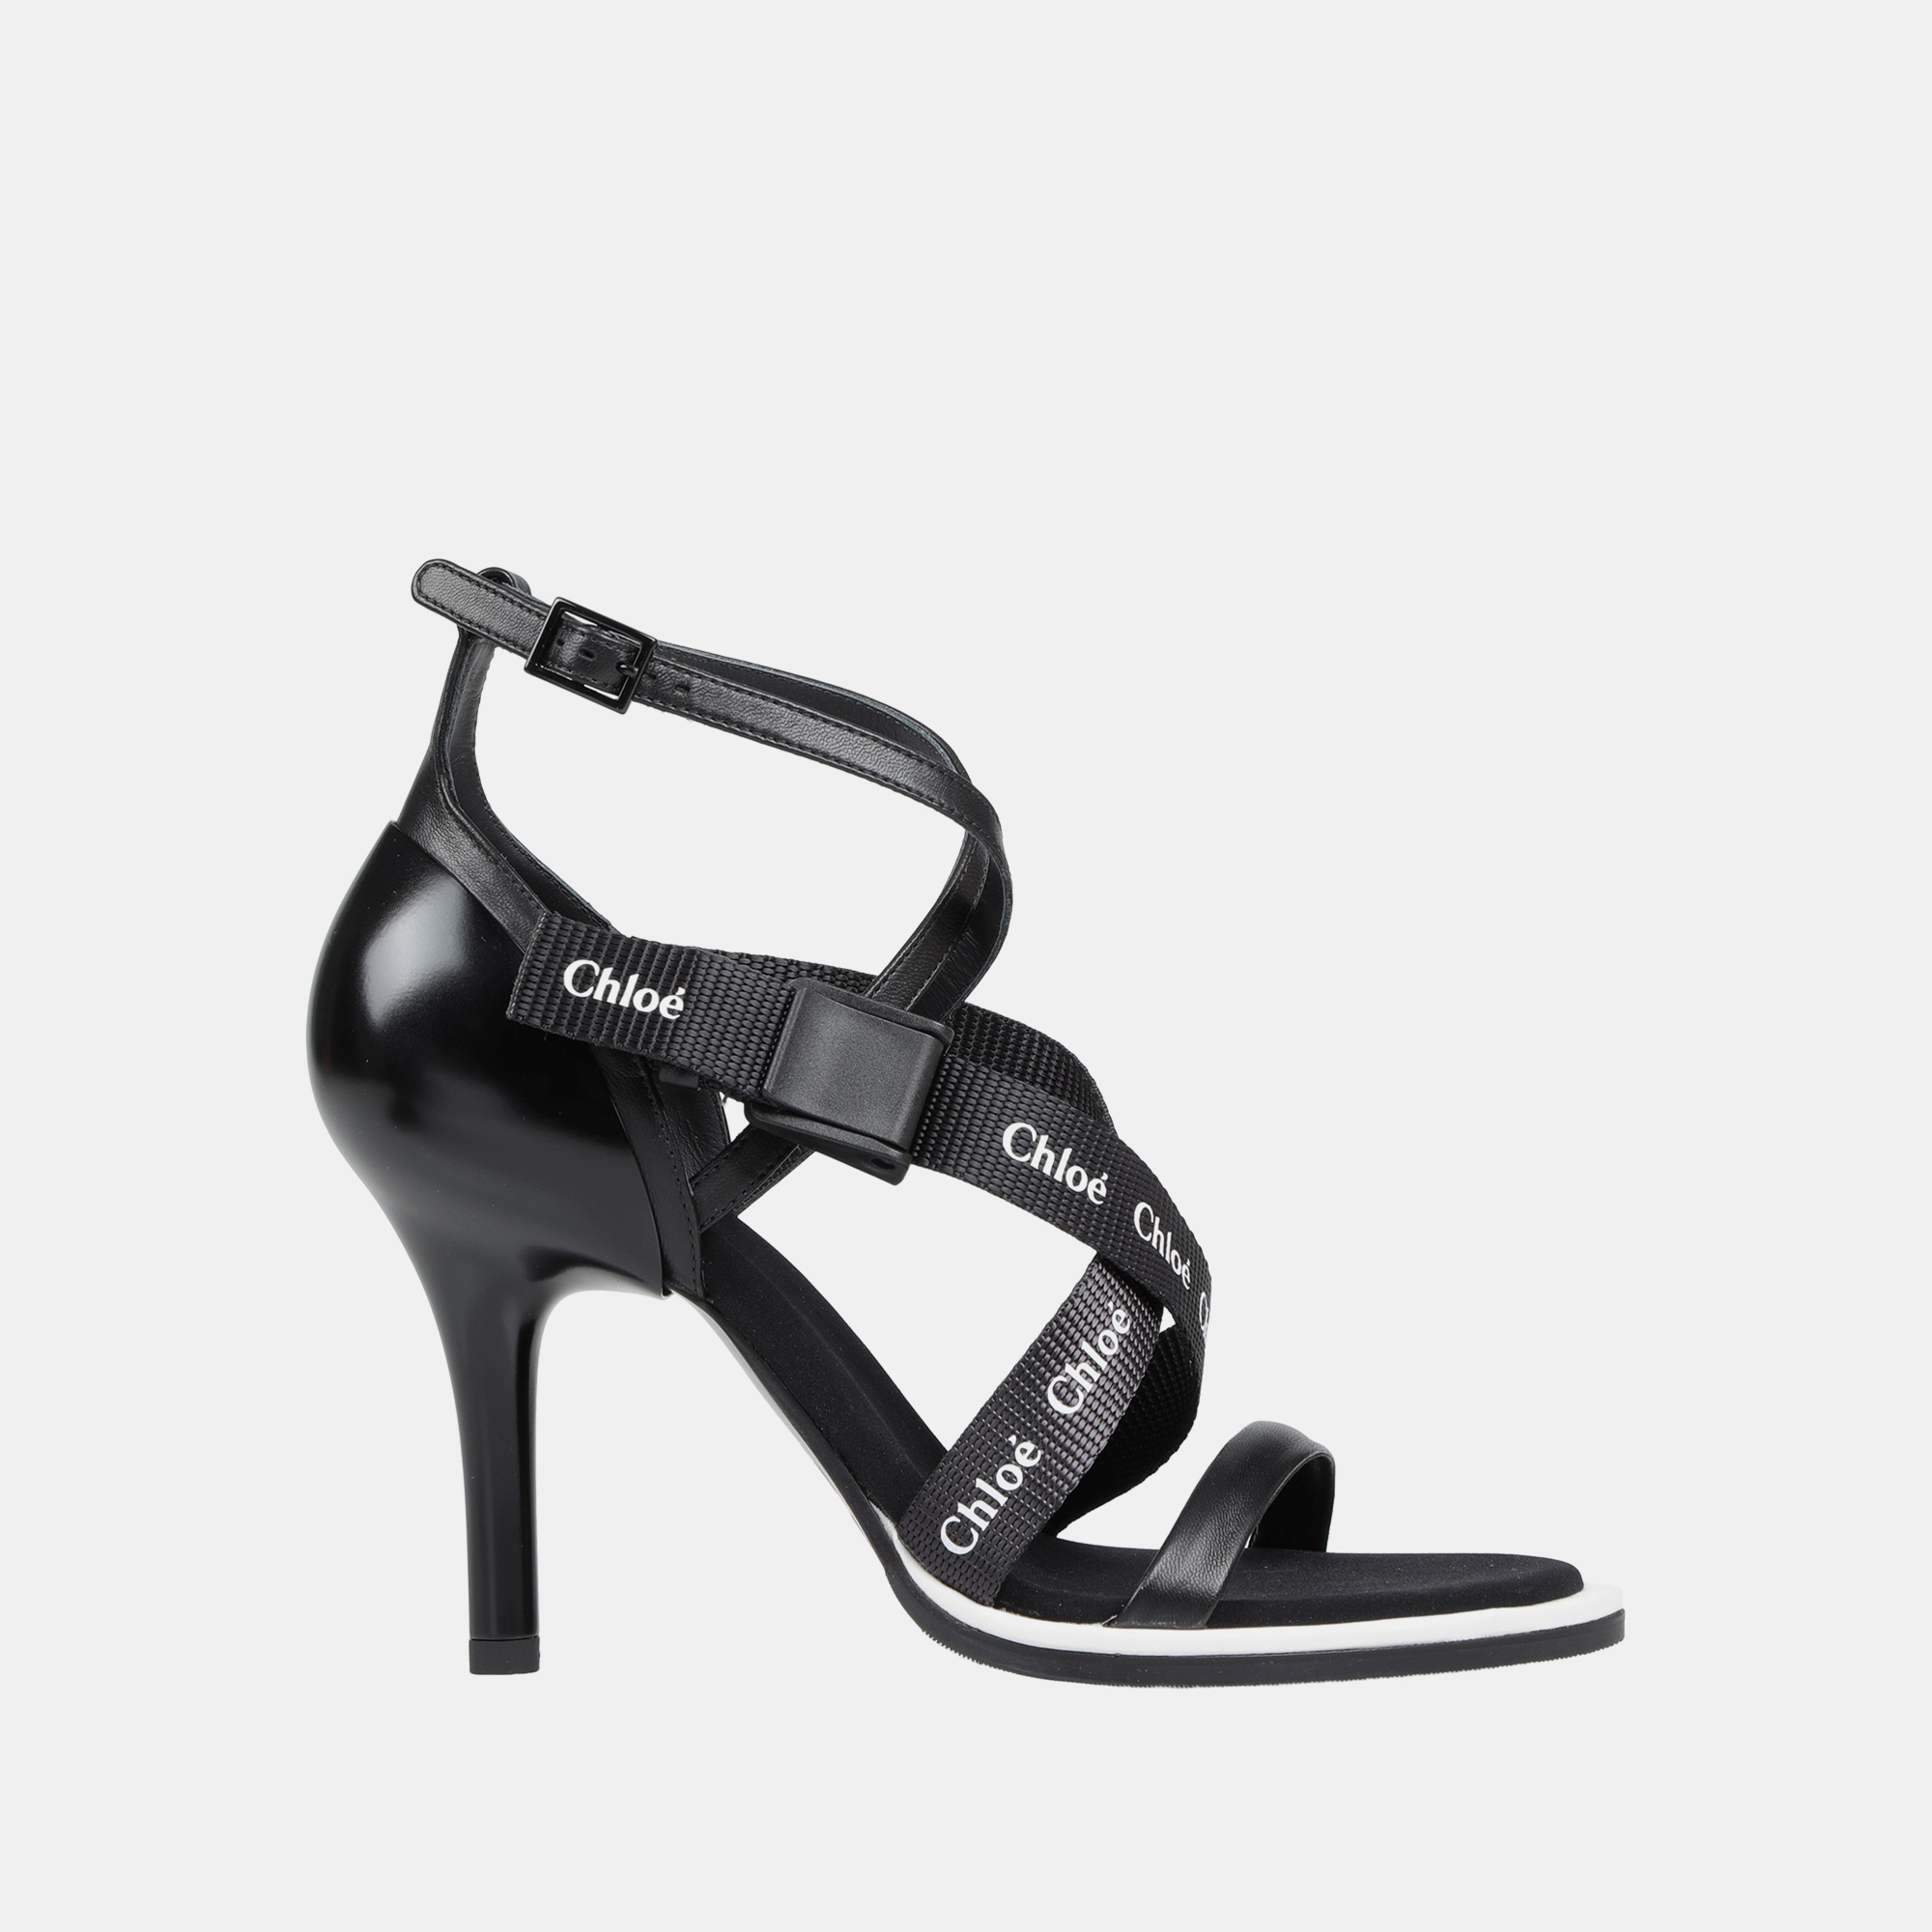 Chloe leather ankle strap sandals 36